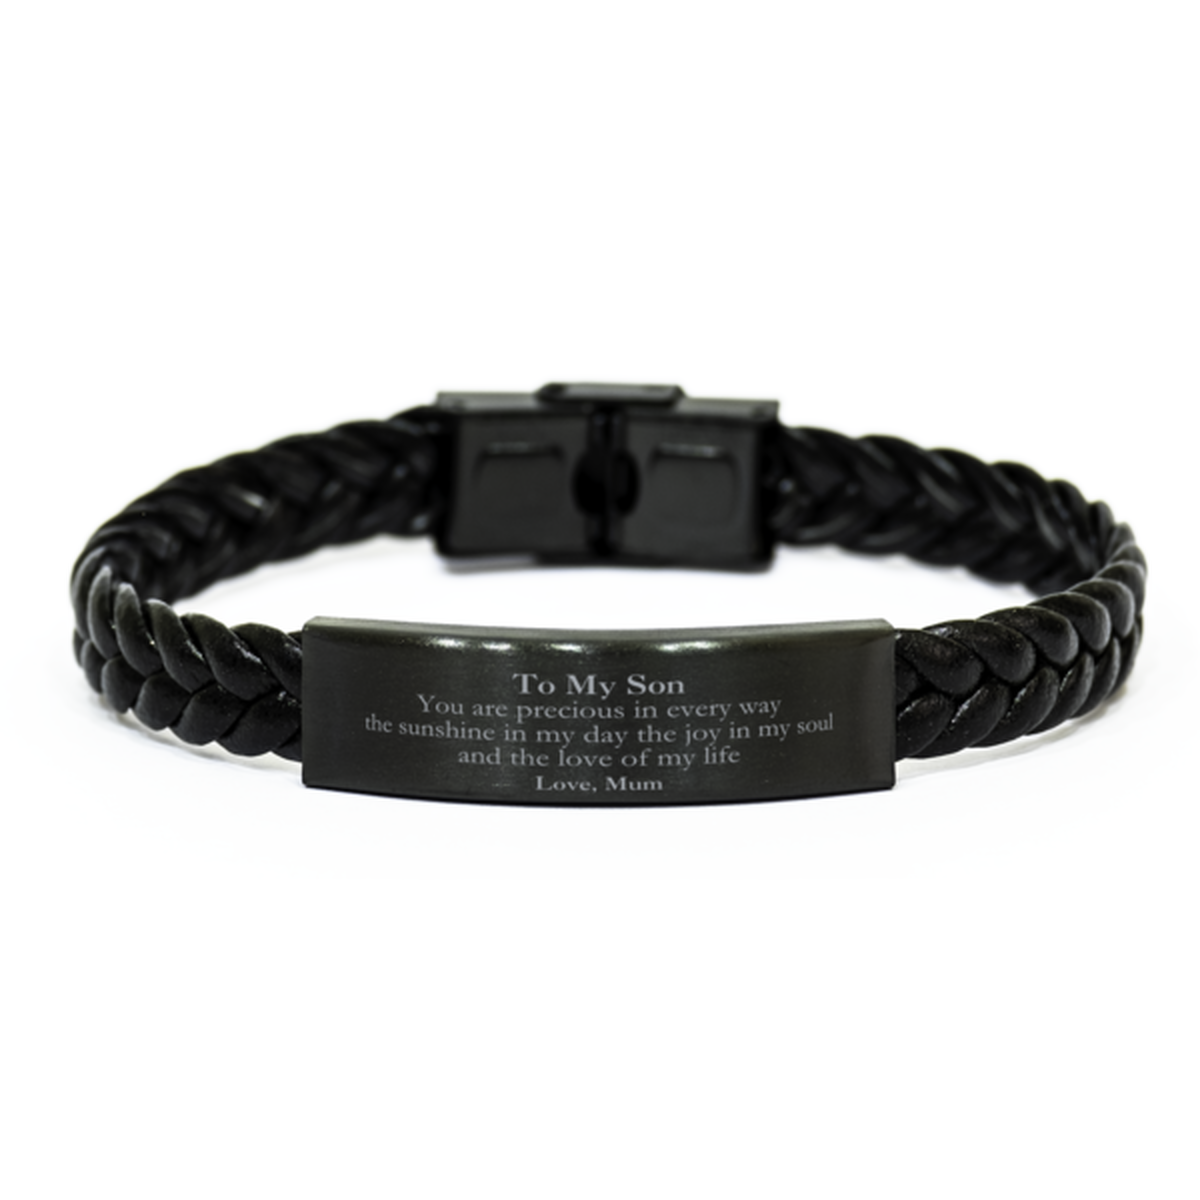 Graduation Gifts for Son Braided Leather Bracelet Present from Mum, Christmas Son Birthday Gifts Son You are precious in every way the sunshine in my day. Love, Mum